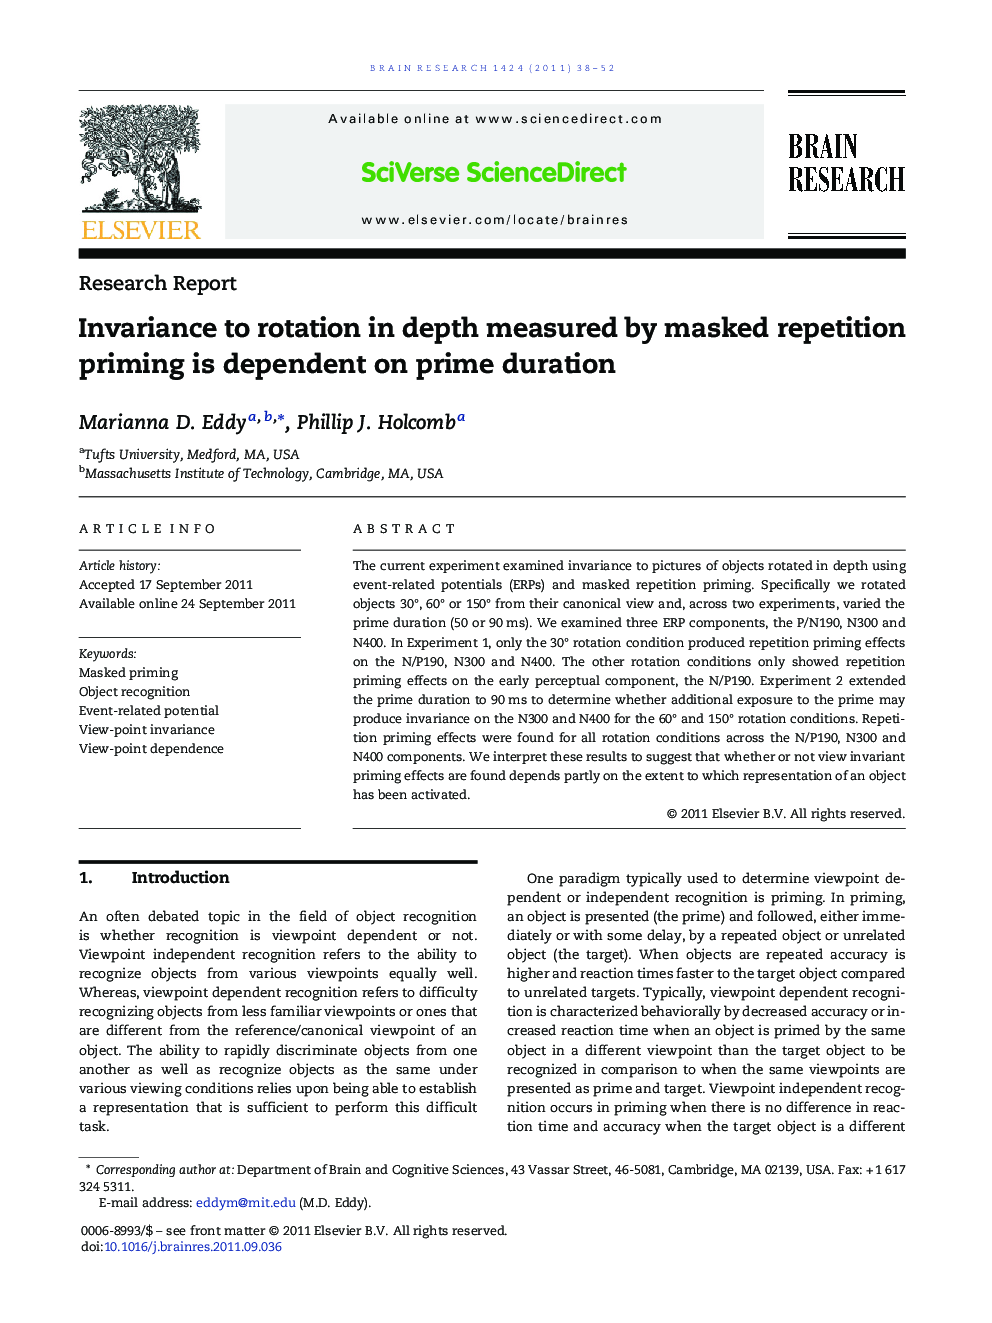 Invariance to rotation in depth measured by masked repetition priming is dependent on prime duration